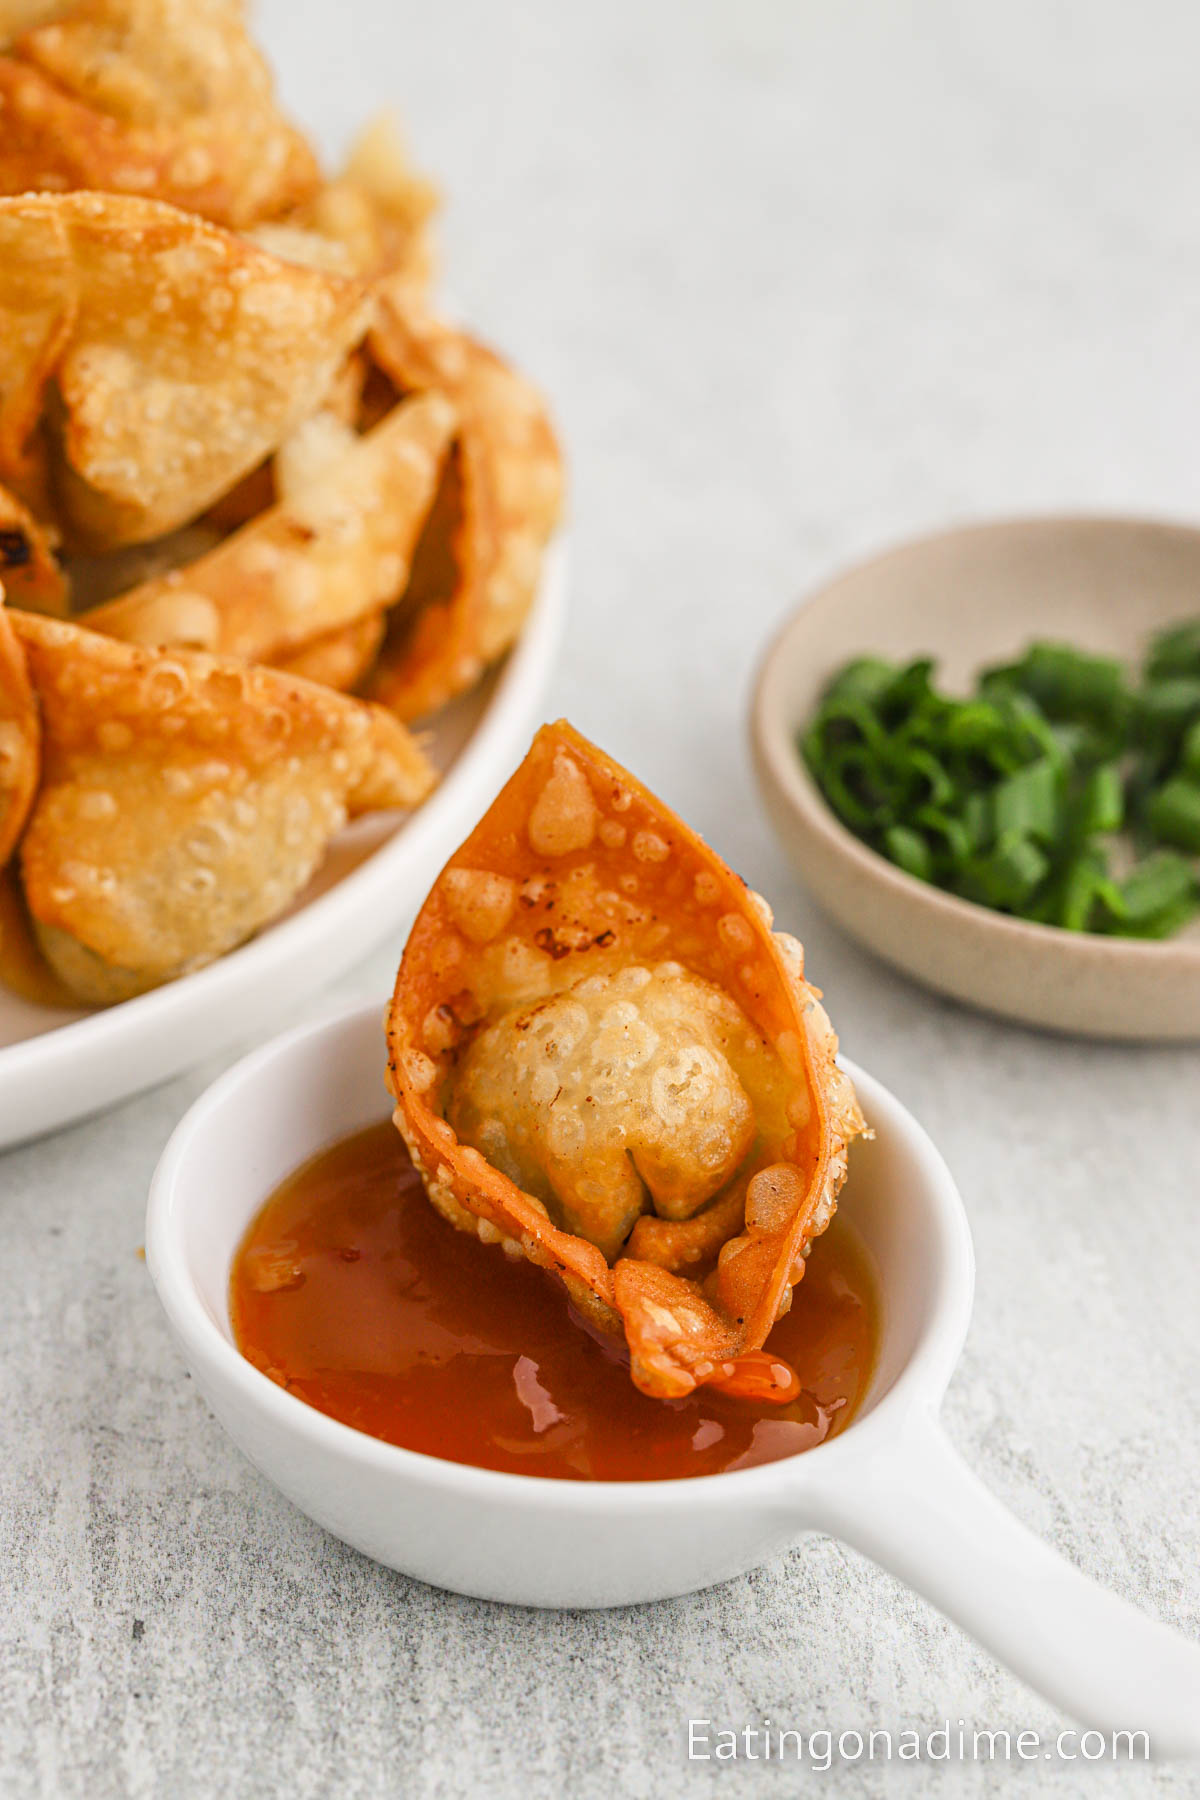 Fried wonton dipping into a sauce